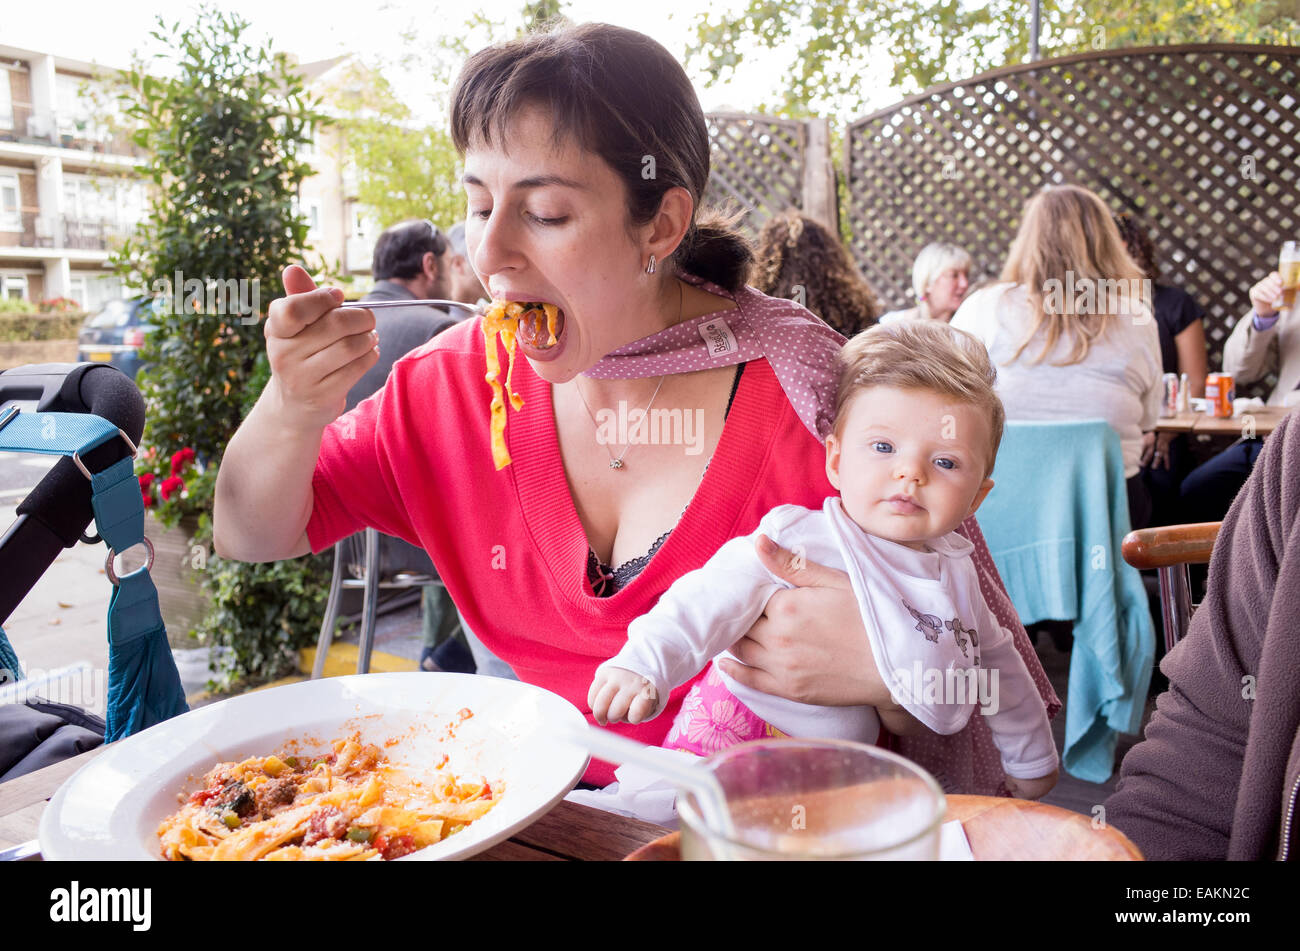 Mother eating pasta at restaurant and holding small three month baby girl in her arms, London, England, UK Stock Photo